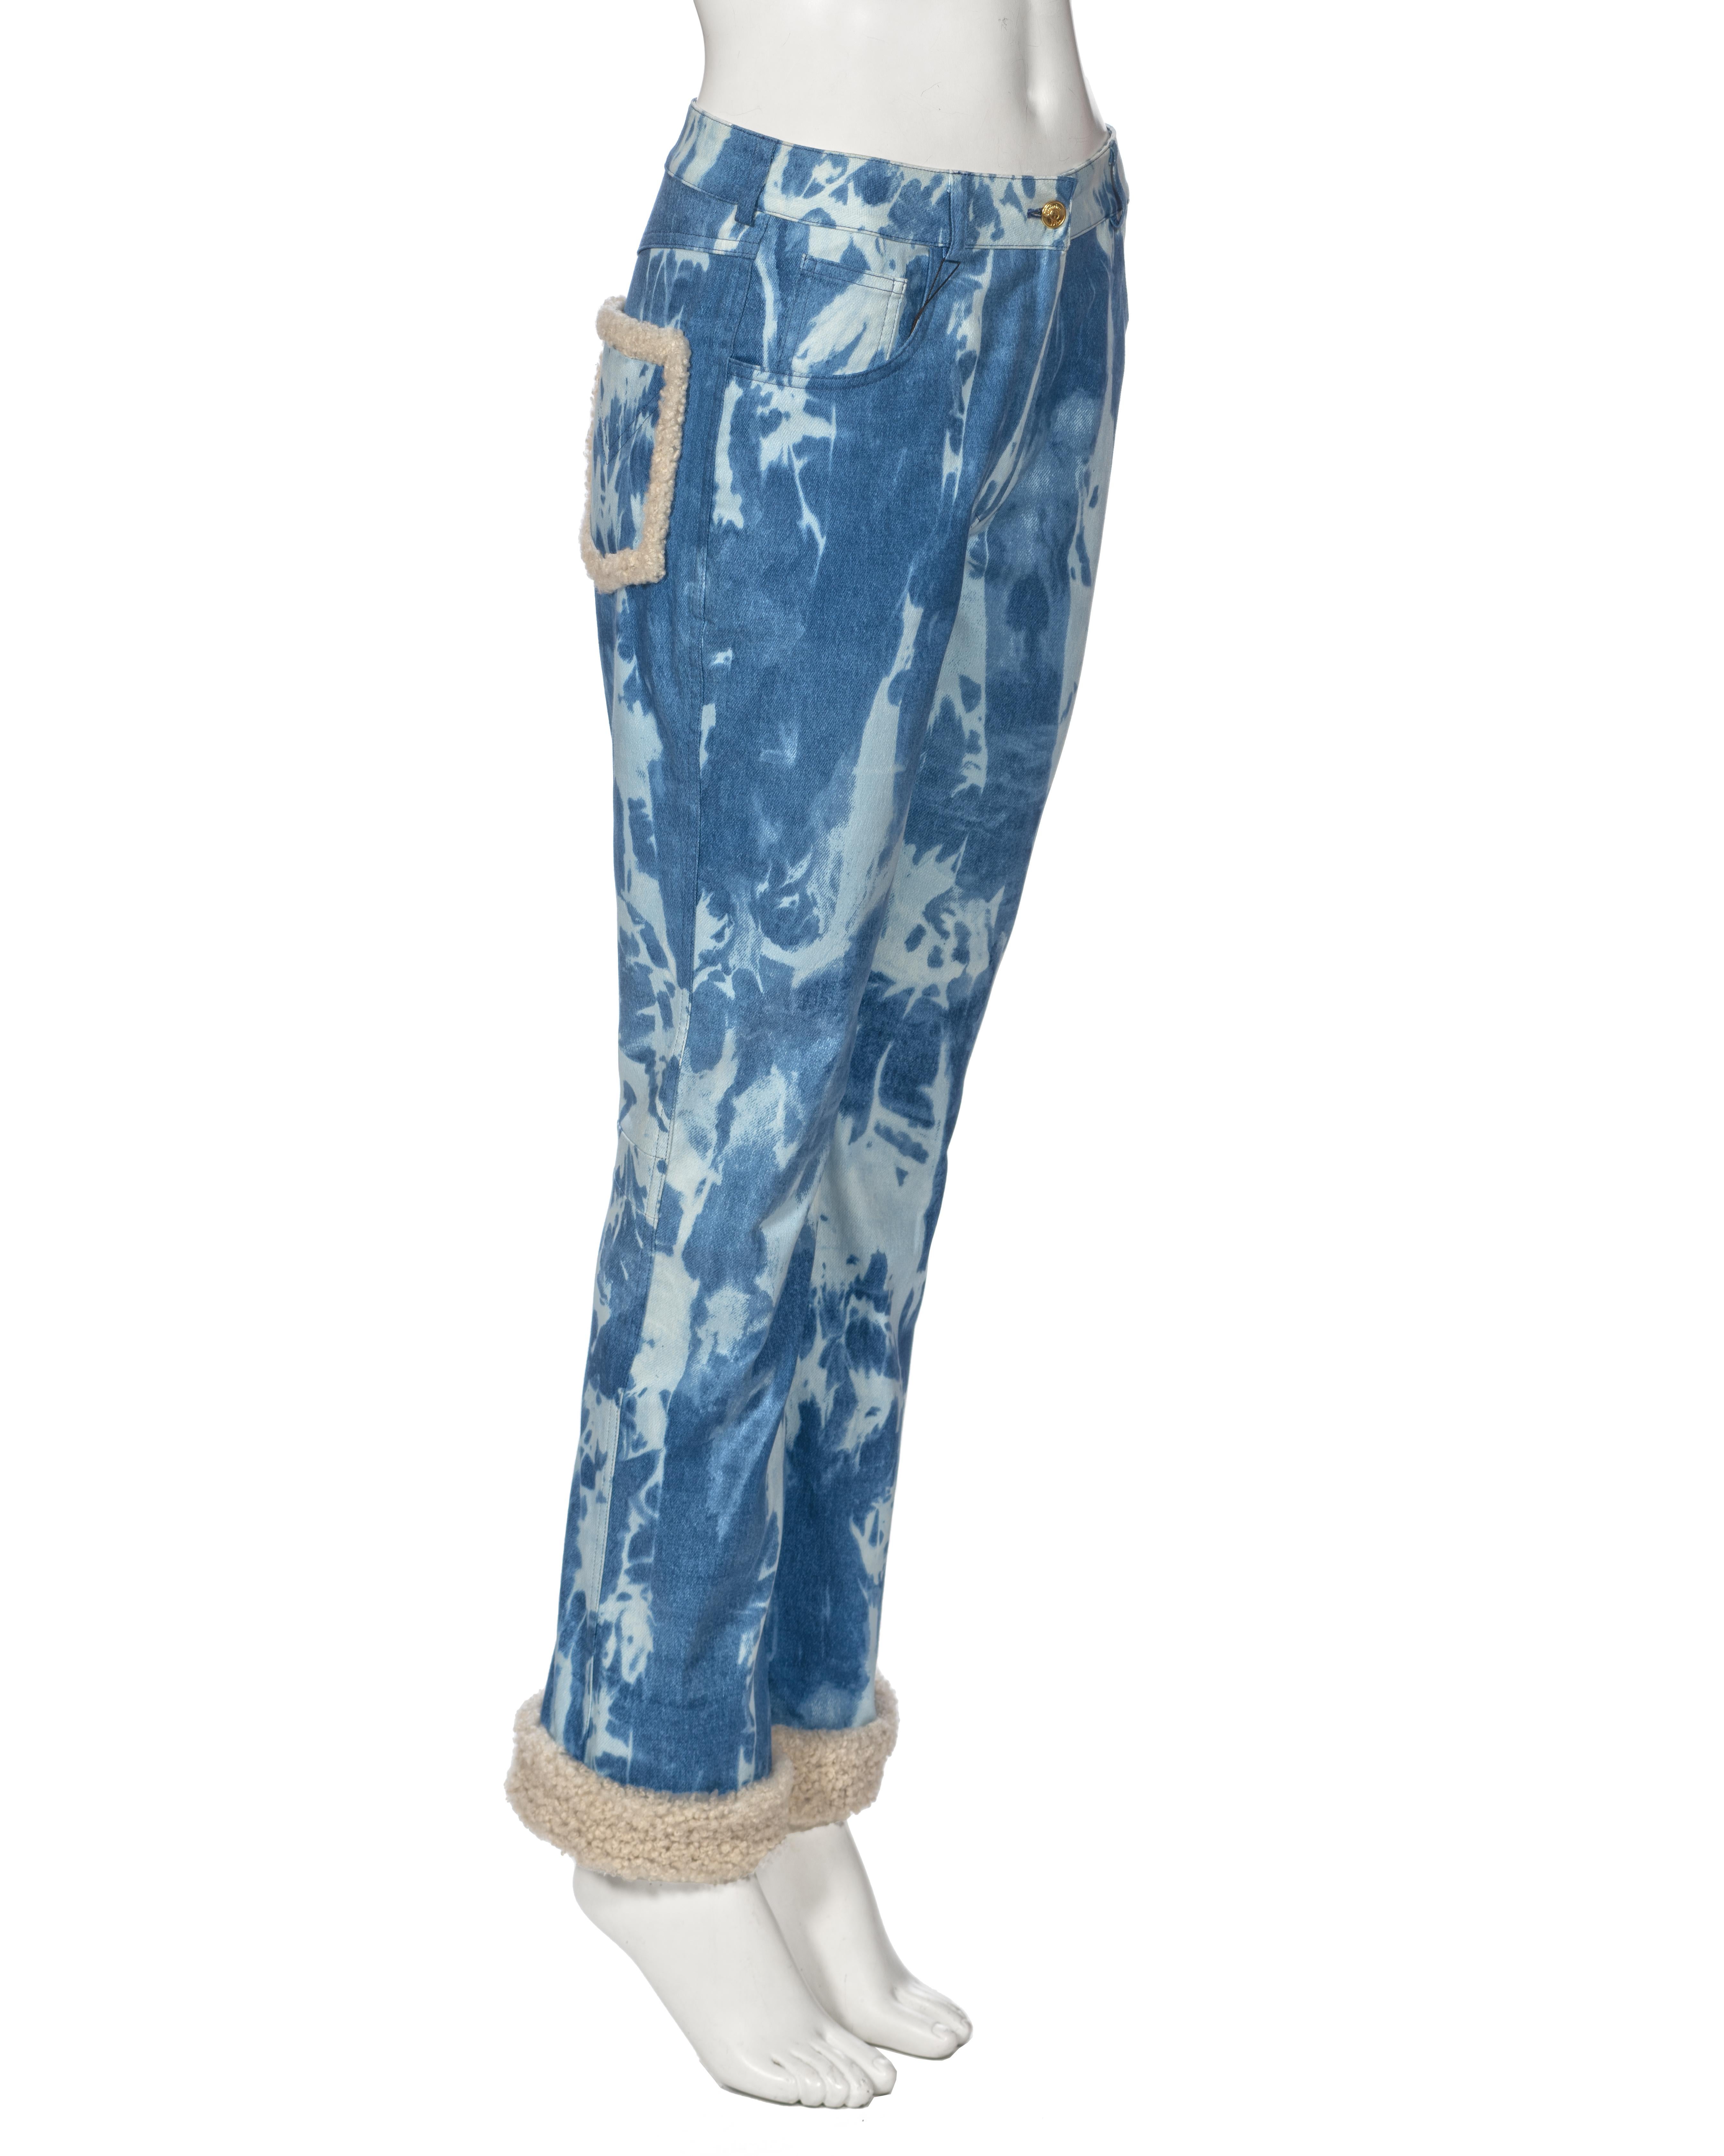 Women's Christian Dior by John Galliano Bleached-Denim and Shearling Pants, fw 2000 For Sale